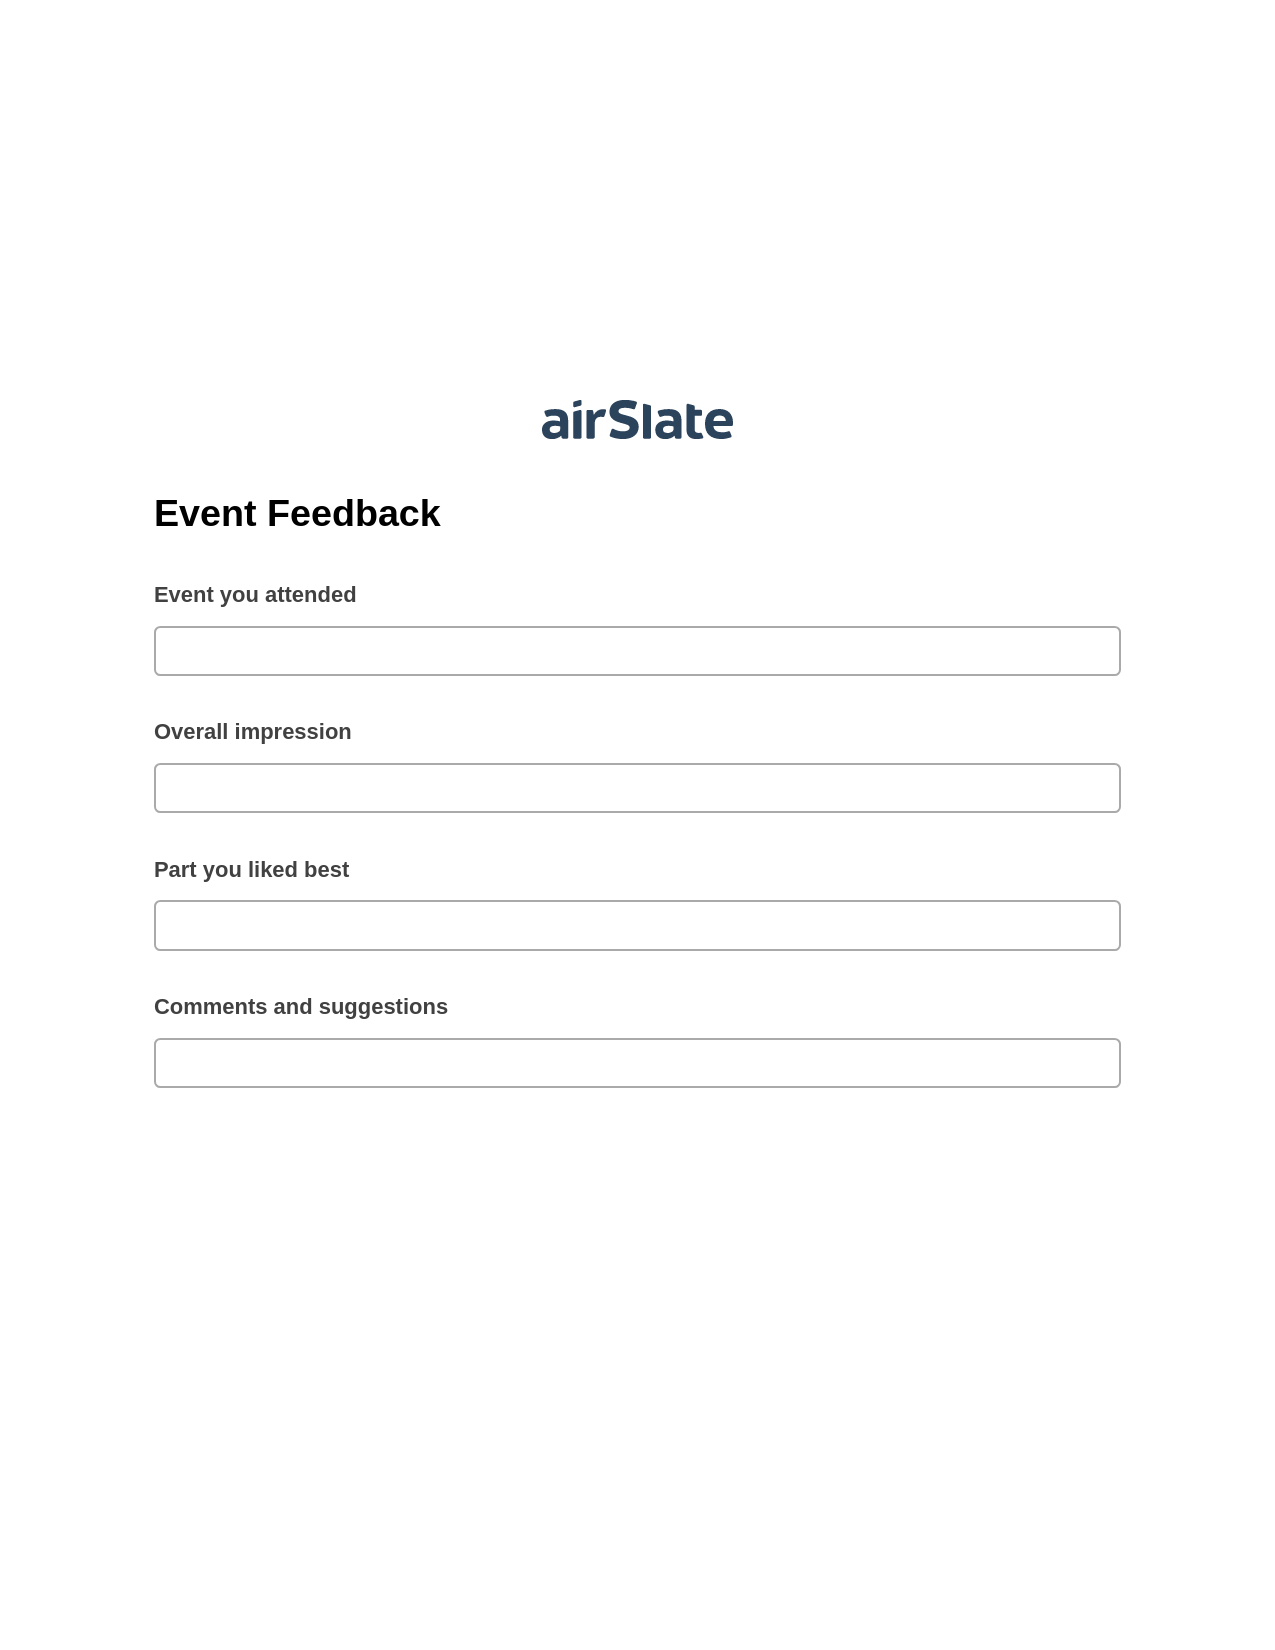 Event Feedback Pre-fill from CSV File Bot, Remove Slate Bot, Export to NetSuite Record Bot